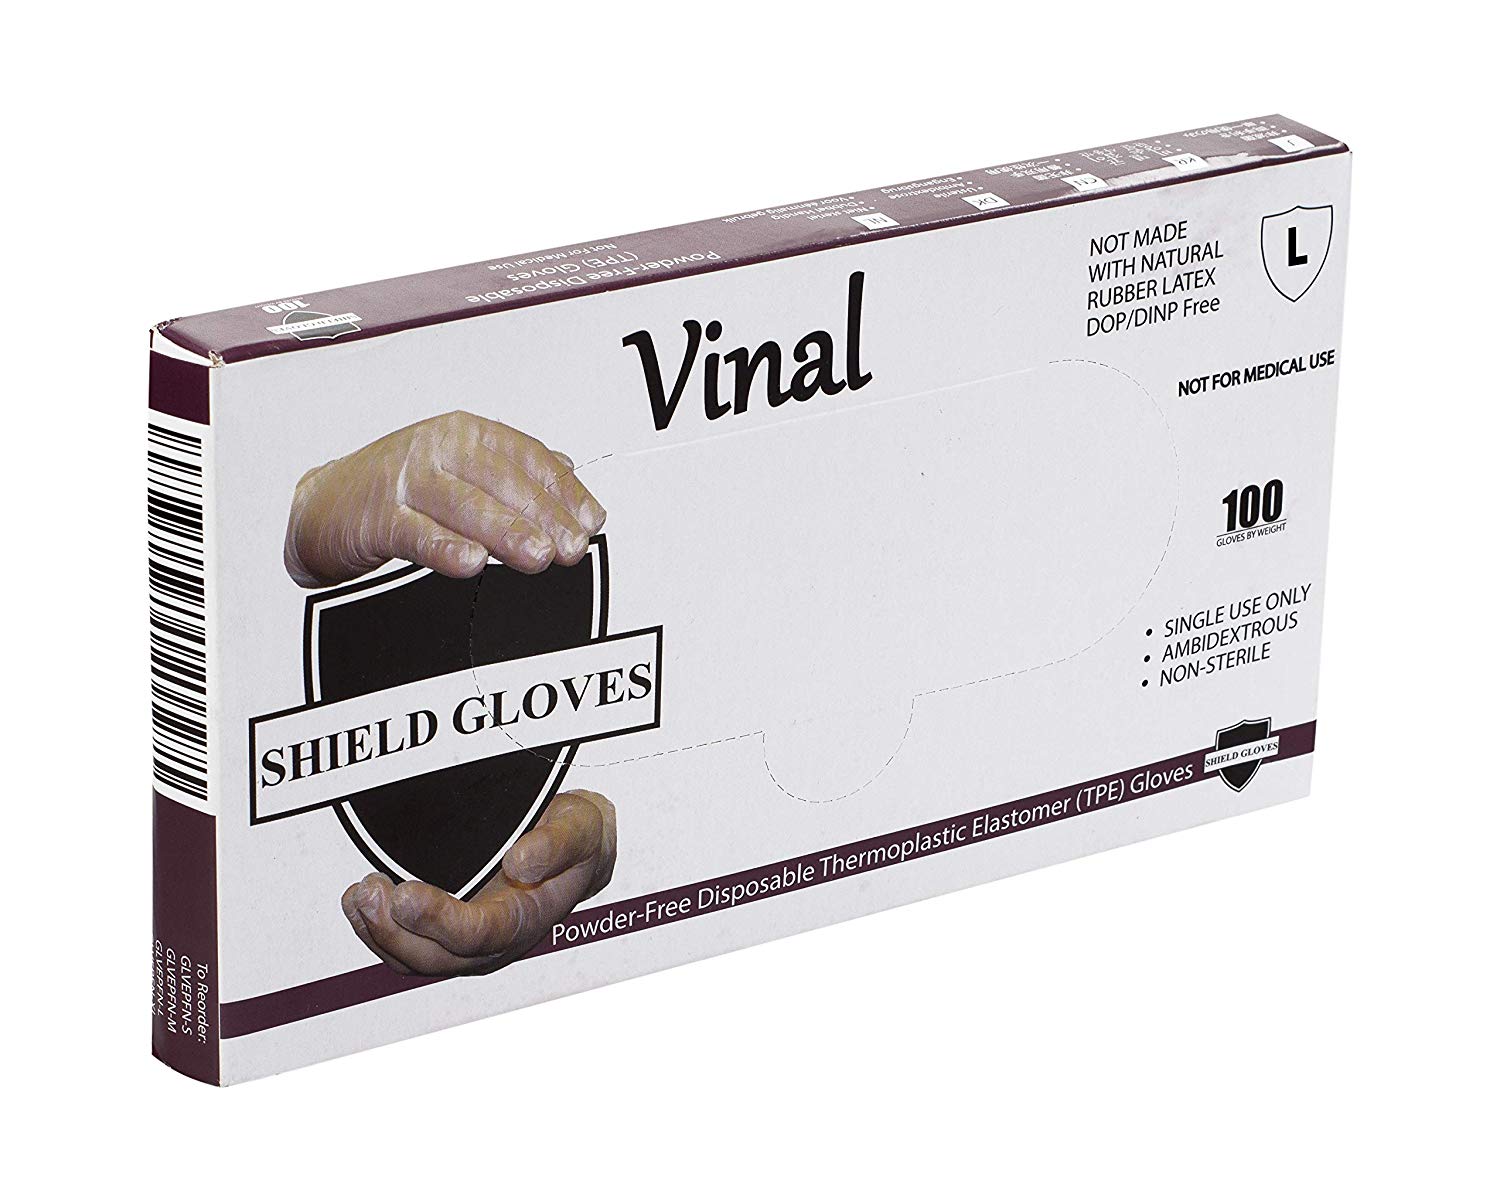 Stretch Vinal Non Examination Shield Gloves, Powder-Free, Clear - Large, 1.5 mil